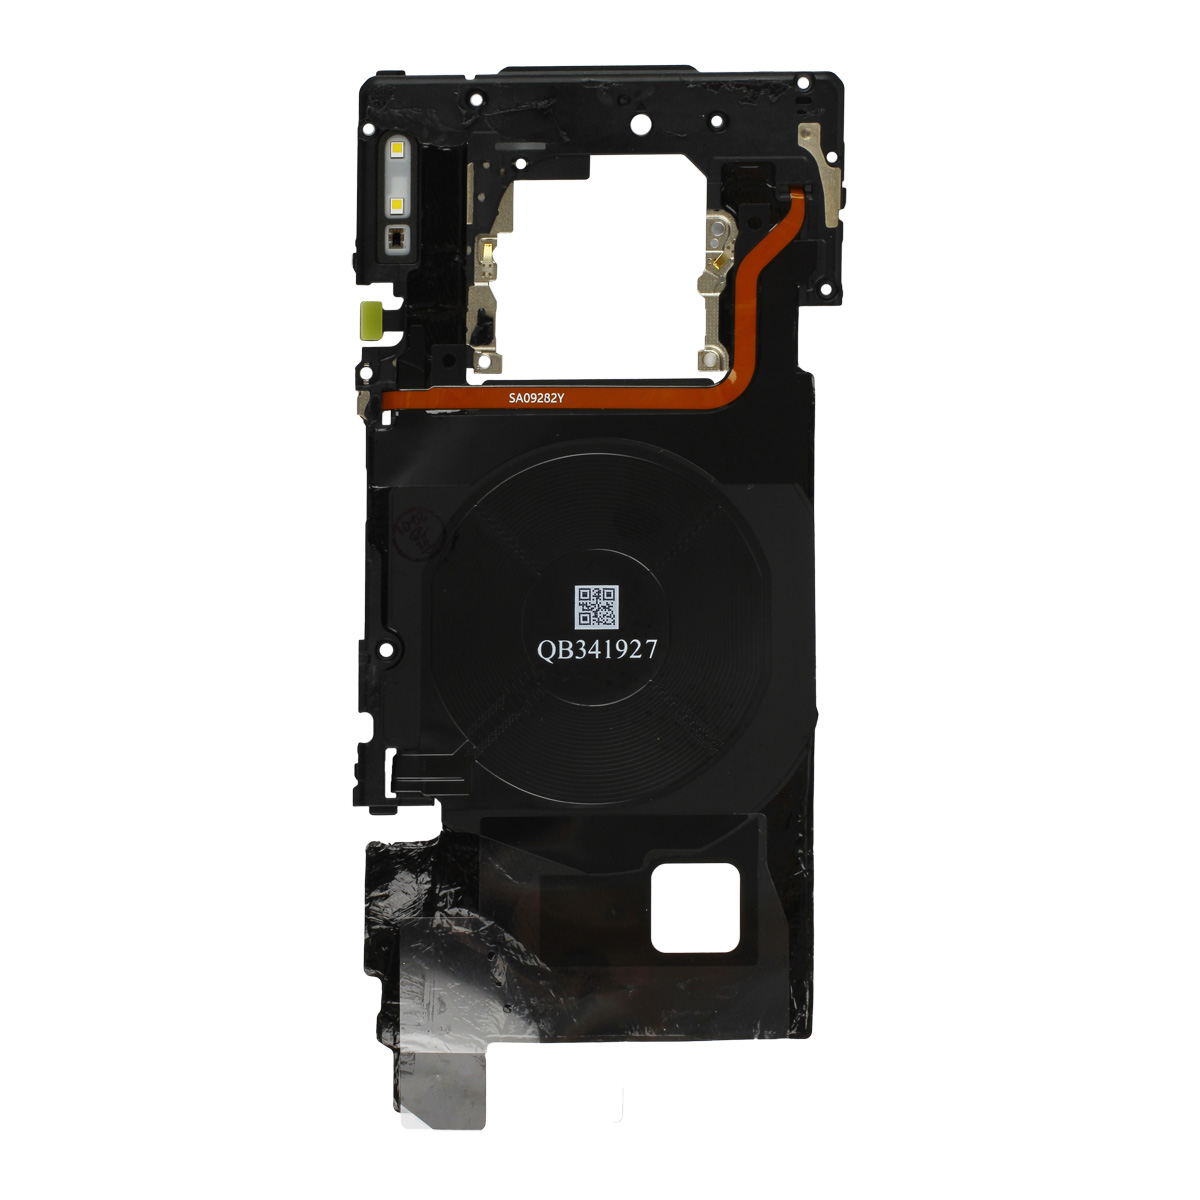 Motherboard Bracket with Wireless Charging compatible with Huawei Mate 30 Pro